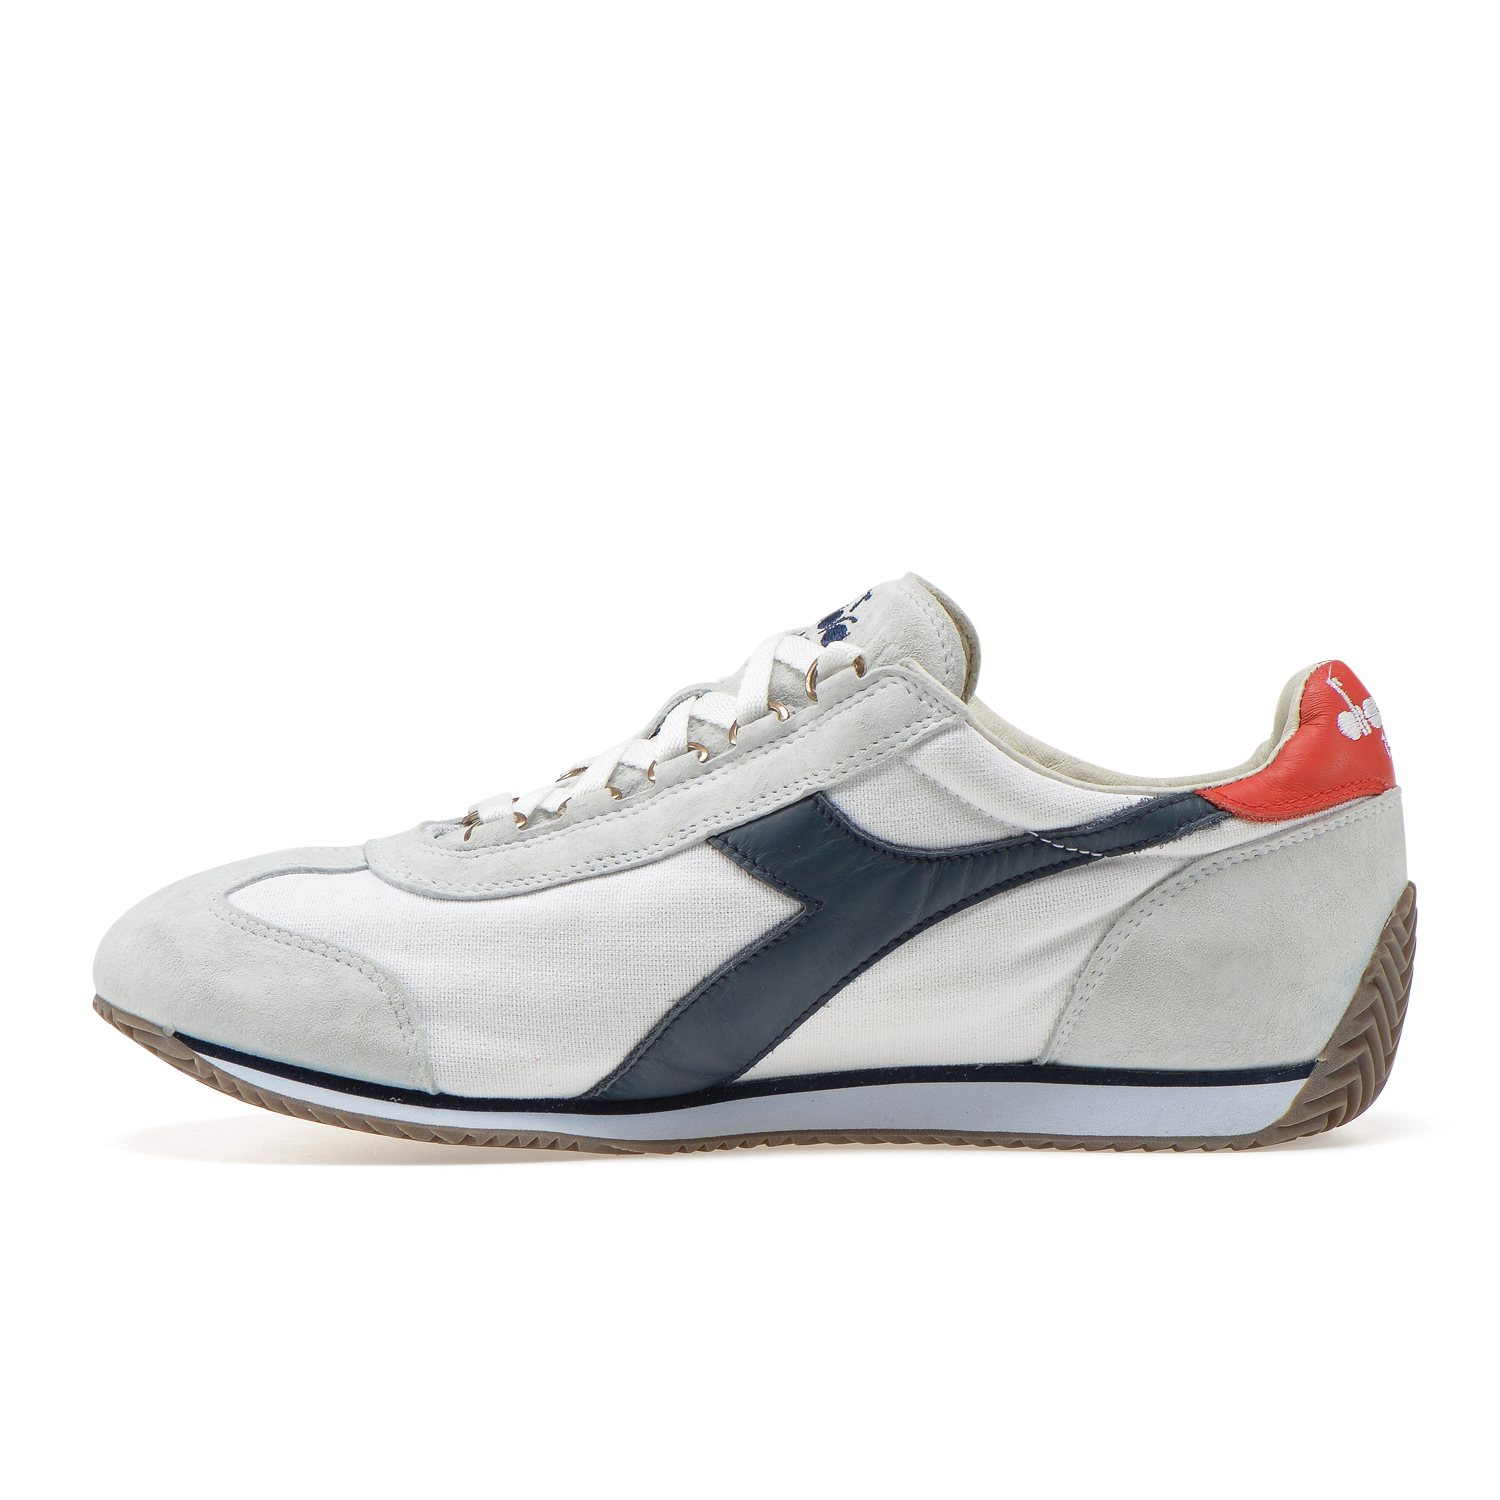 Diadora Heritage - Sneakers EQUIPE STONE WASH 12 for man and woman | eBay